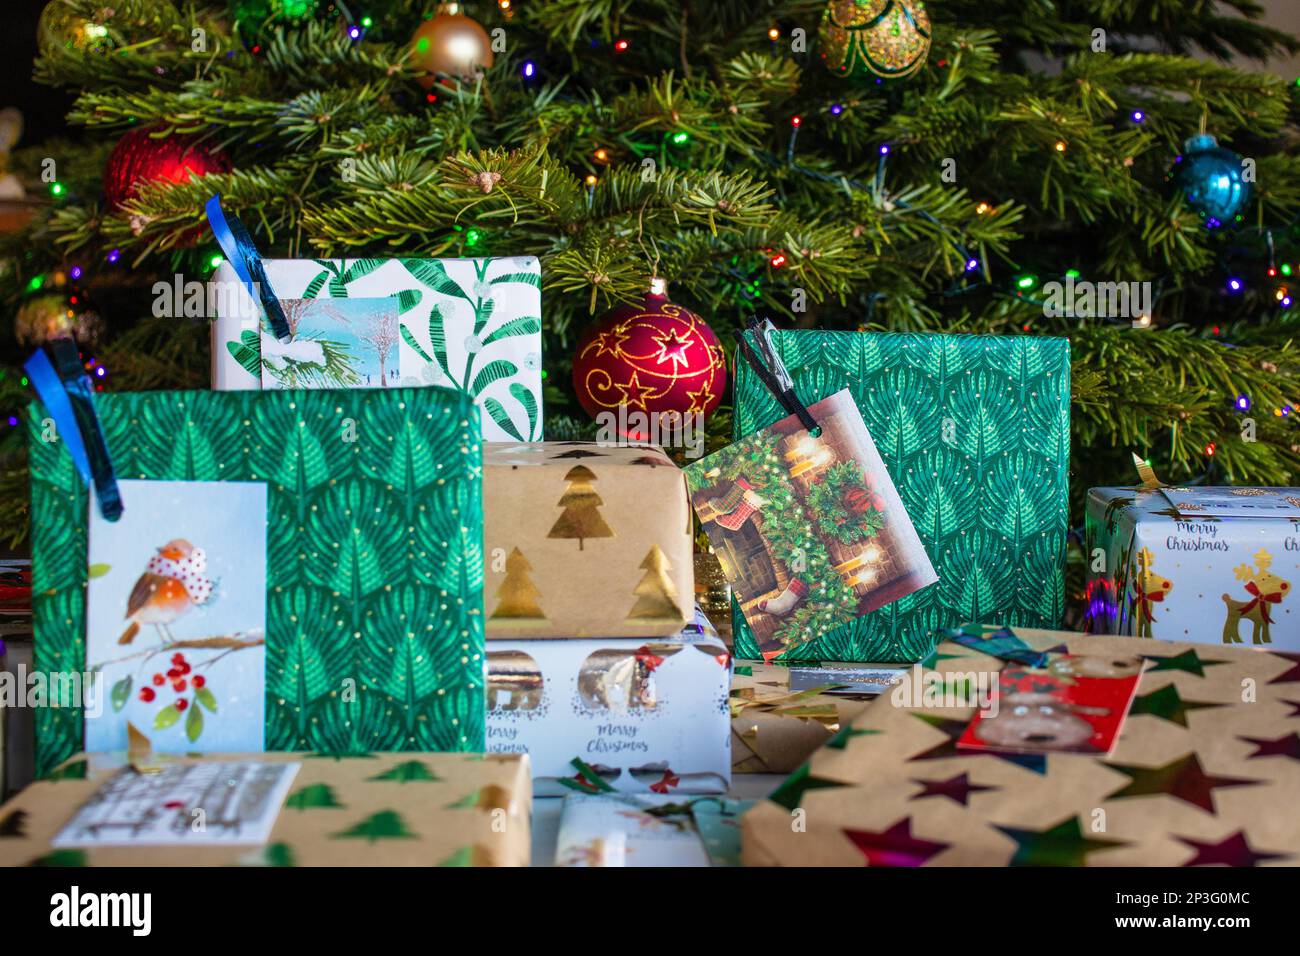 A pile of wrapped Christmas presents lie under the Christmas tree. They're wrapped in different patterned wrapping papers and have gift tags attached. Stock Photo